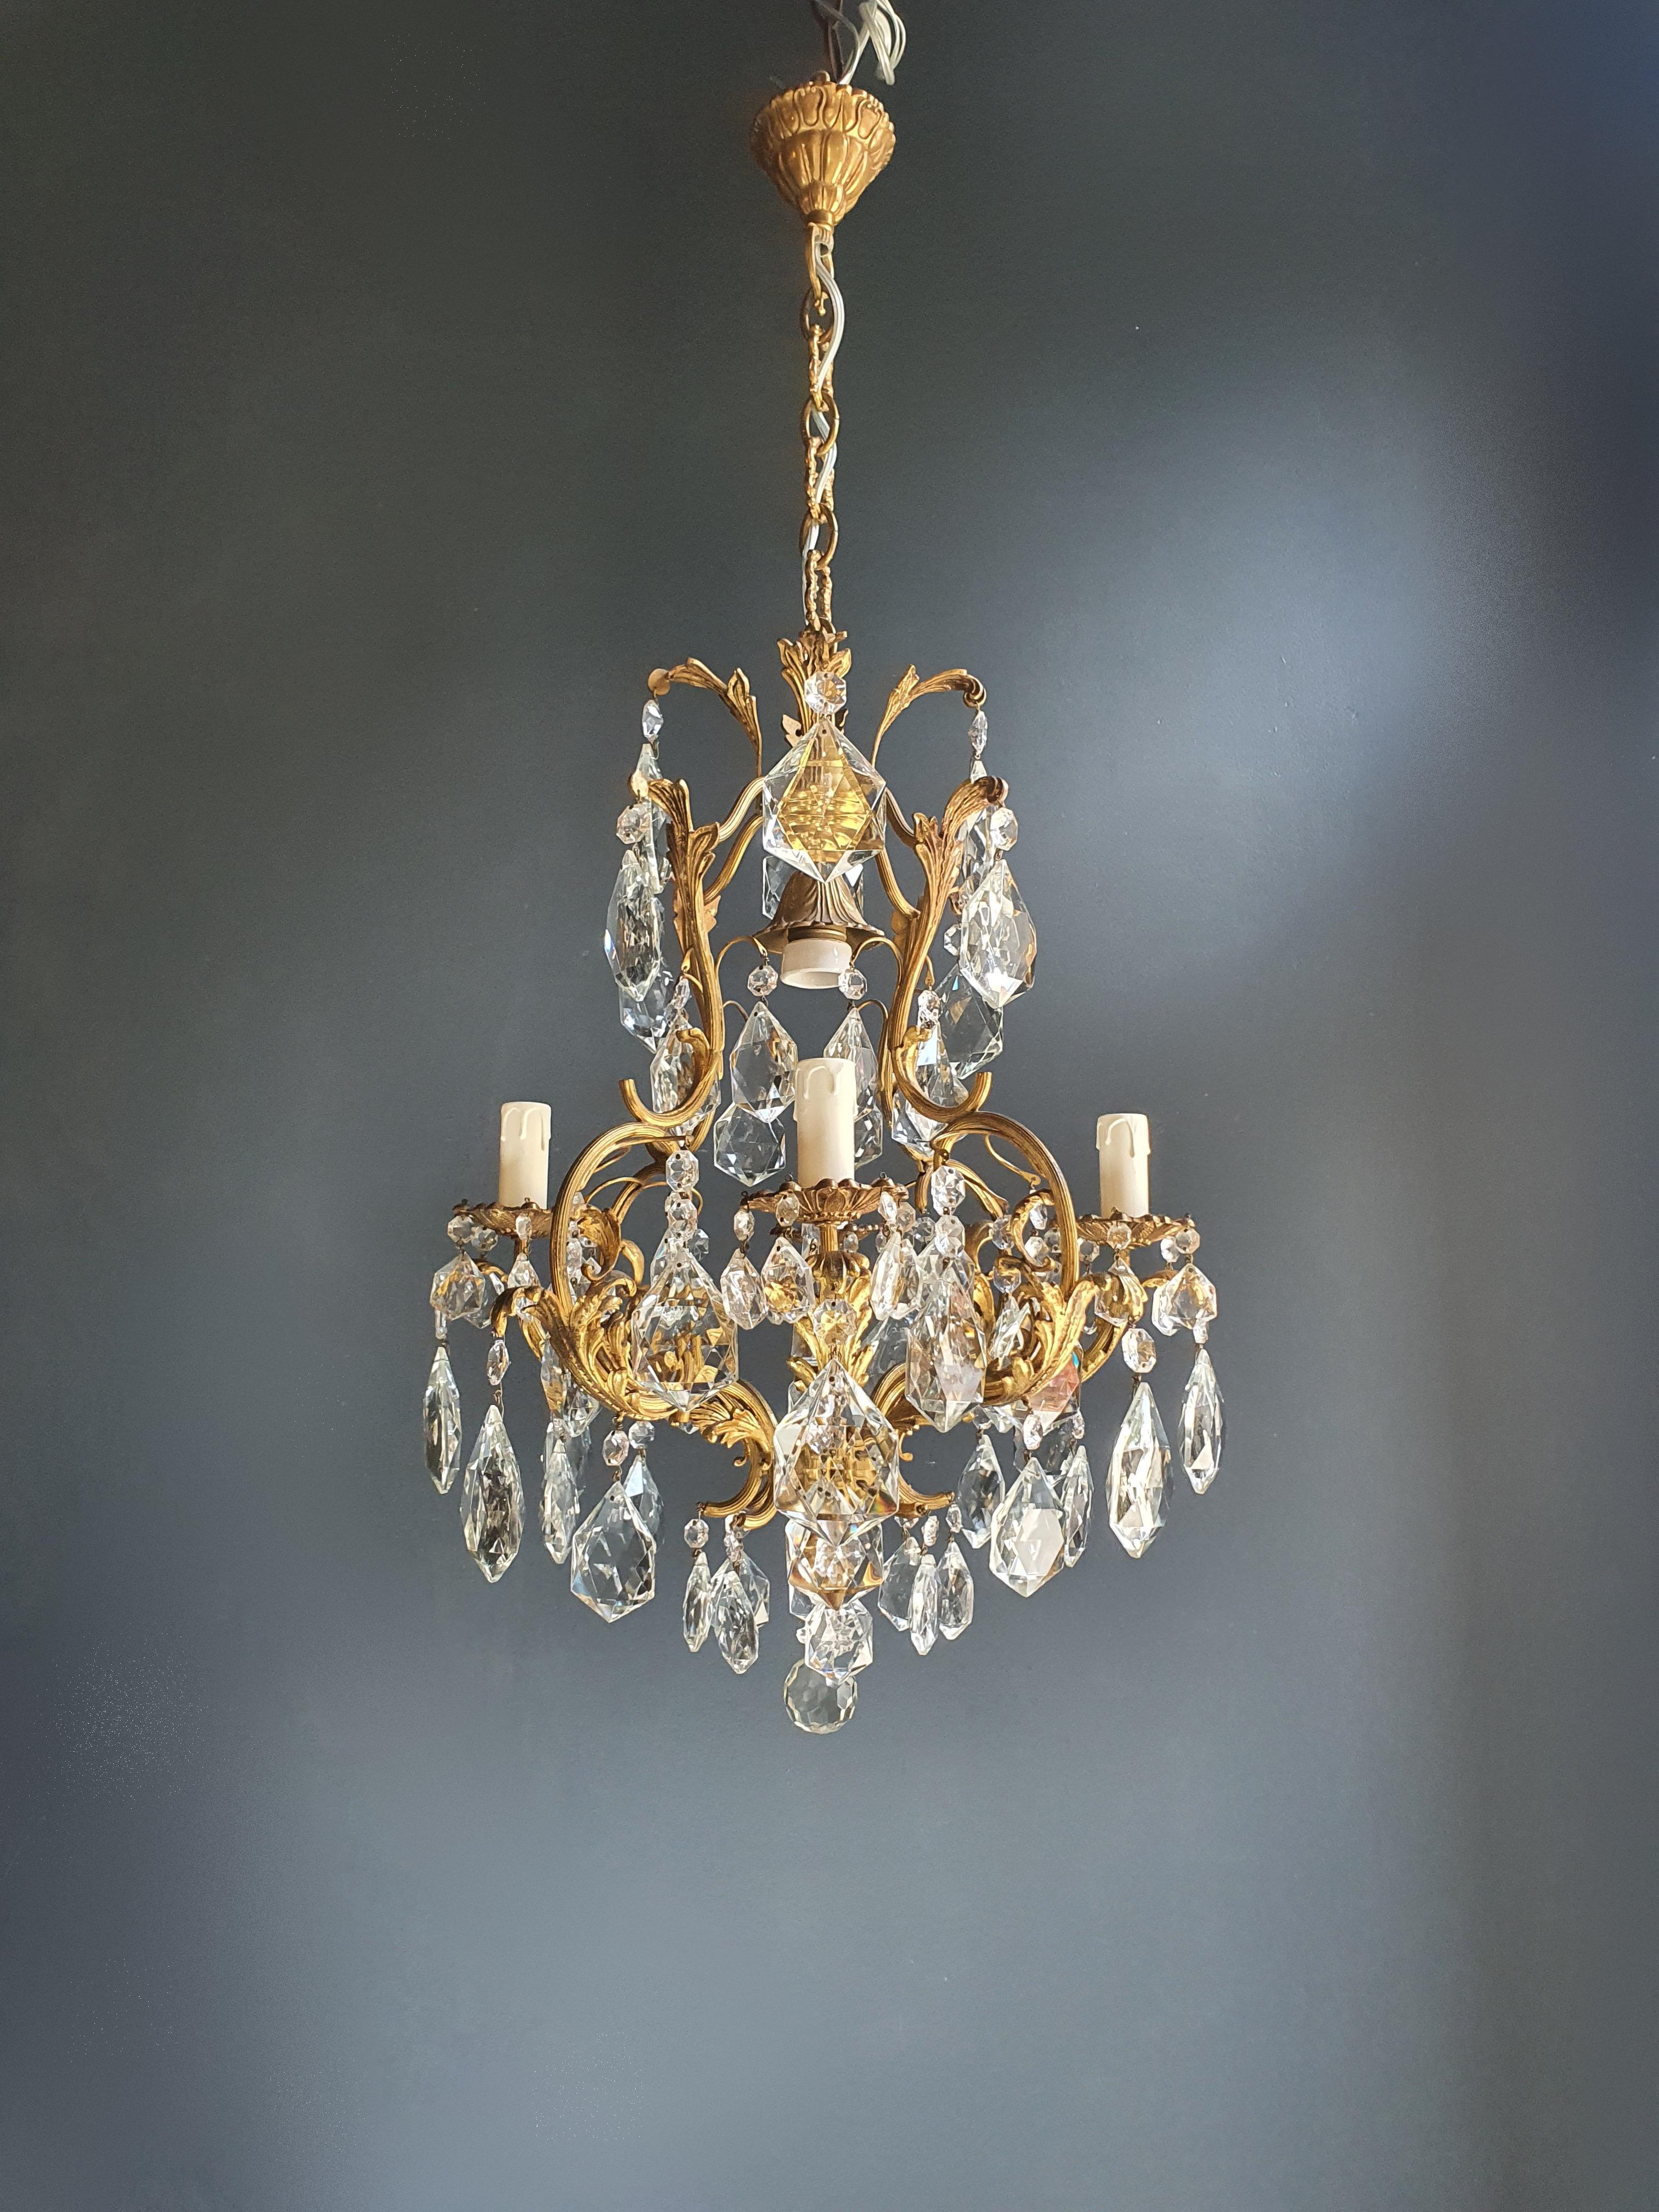 Vintage Chandelier: Lovingly Restored in Berlin, Ready to Illuminate Your Space

Step into a world of vintage allure with this chandelier, carefully restored in Berlin with immense care and expertise. Its historical charm meets modern practicality,